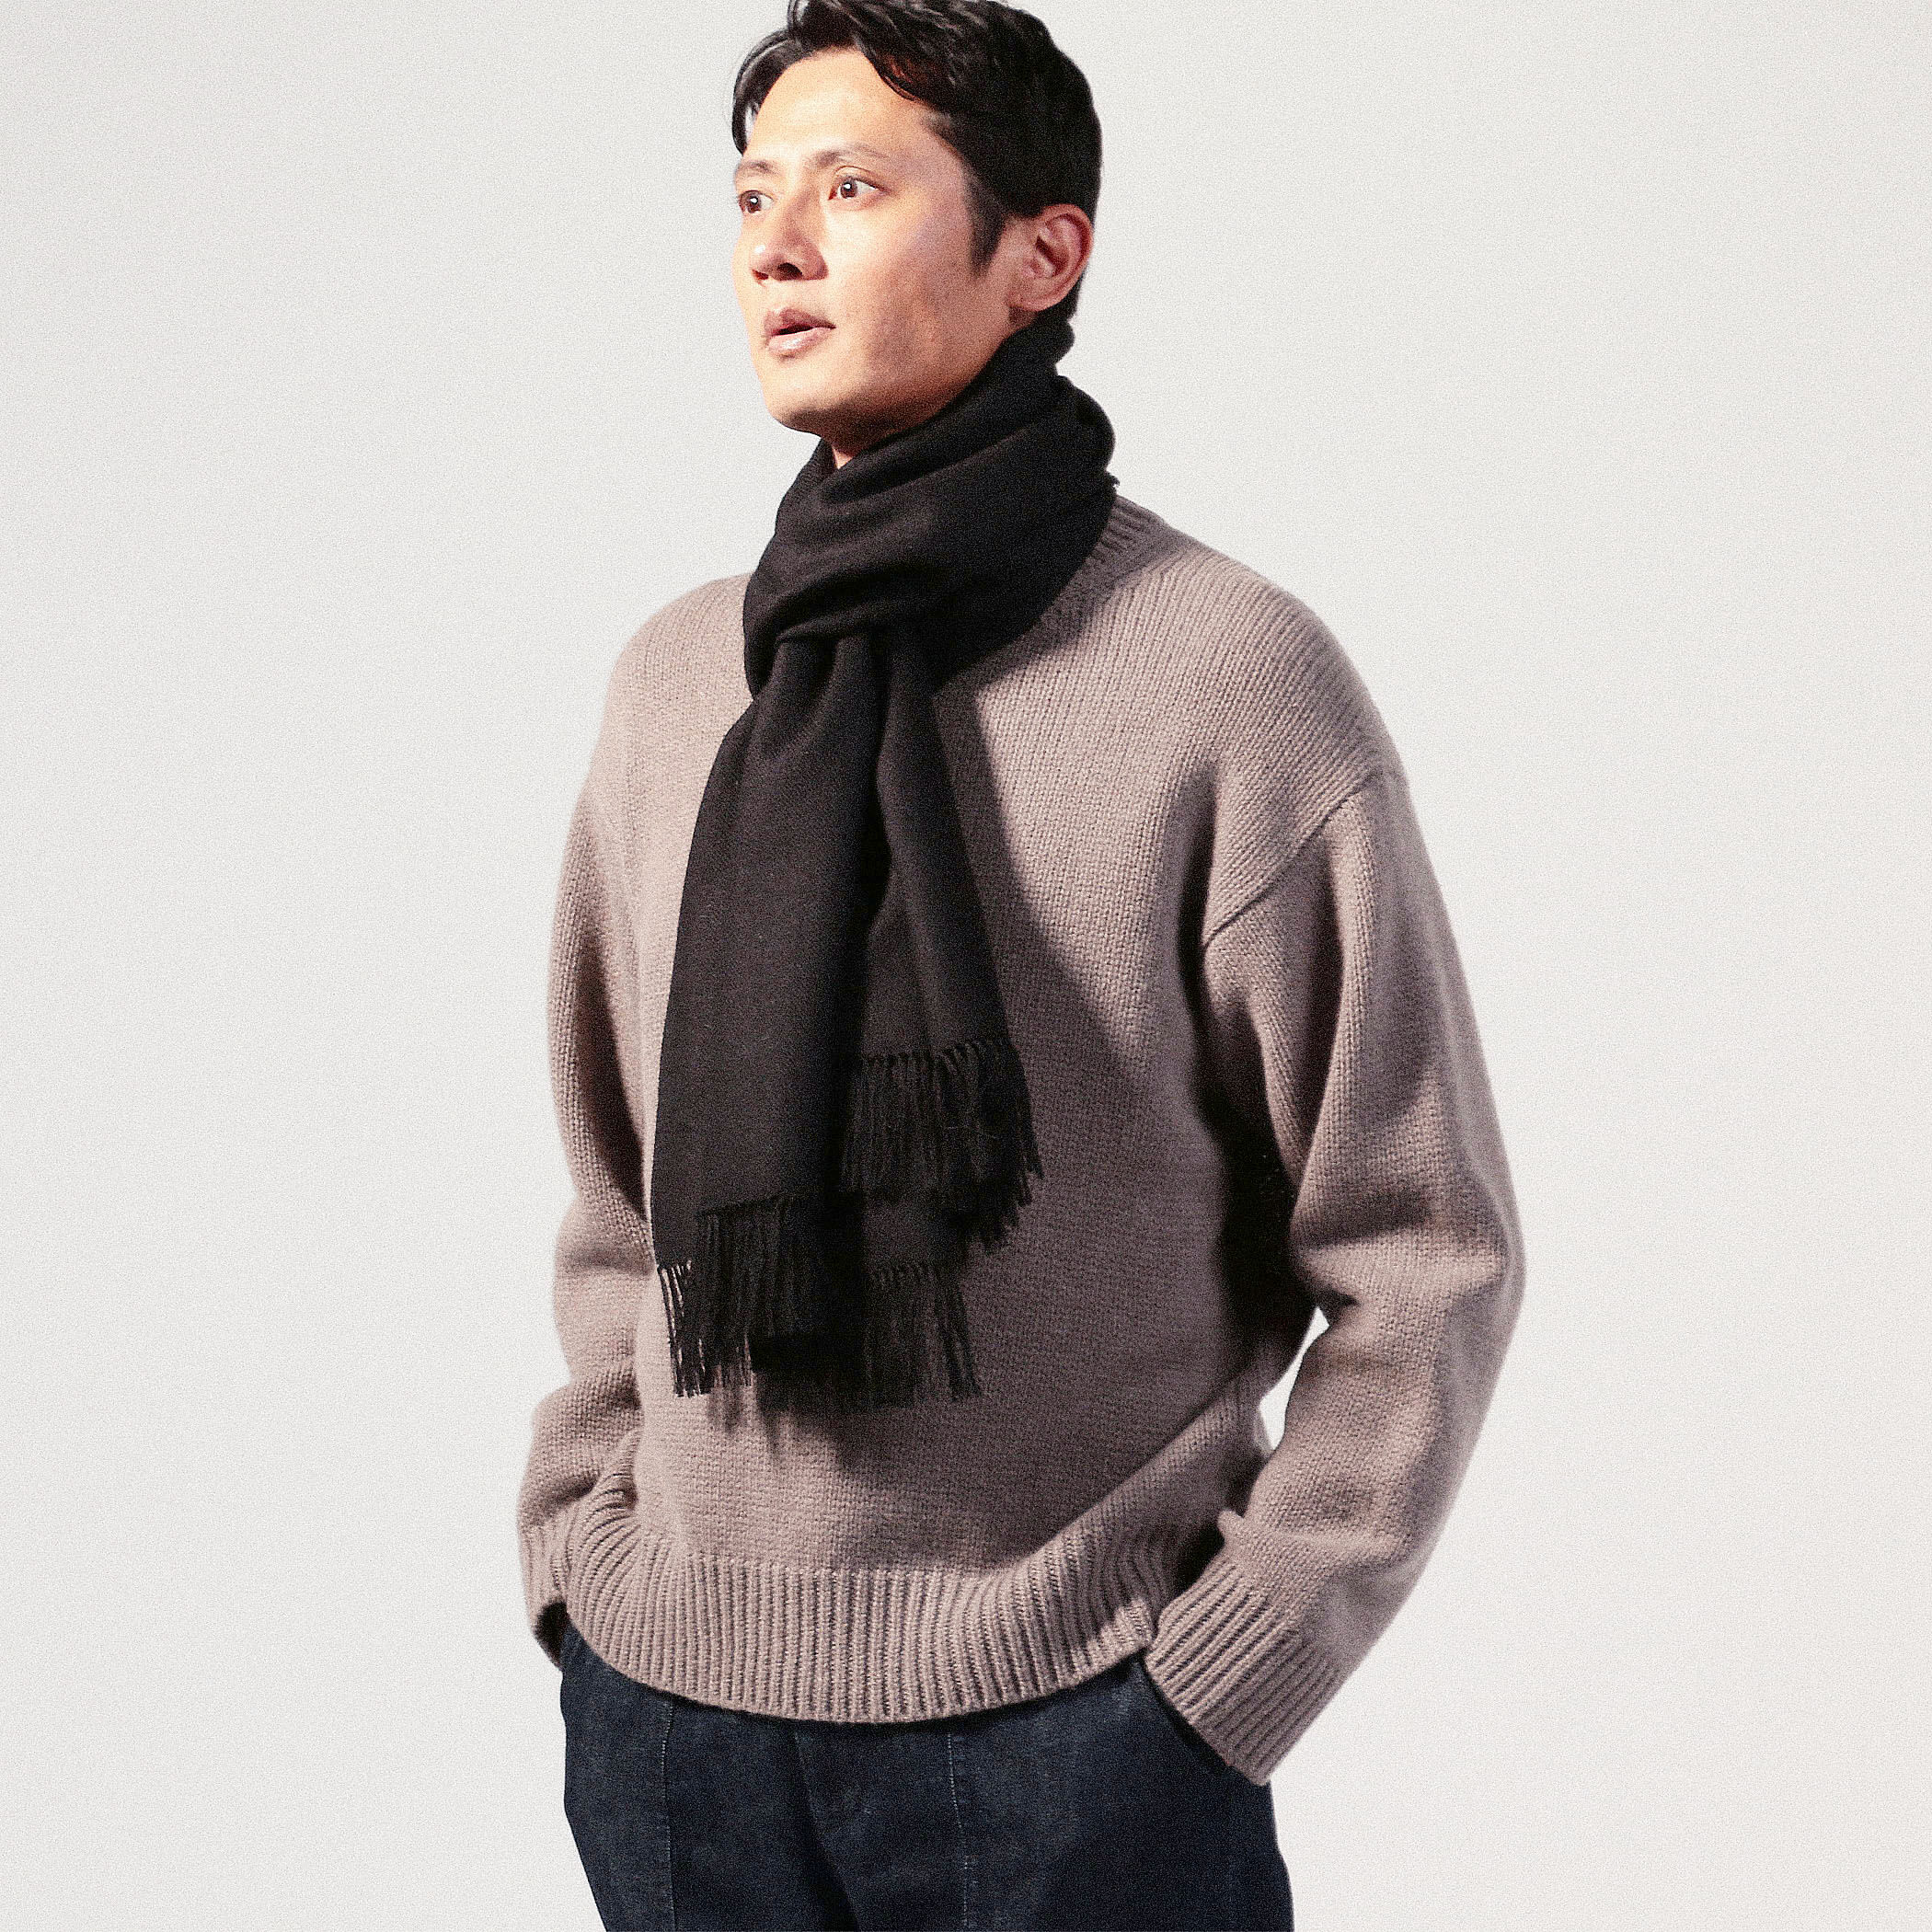 THE INOUE BROTHERS Non Brushed Large Stole アルパカ ストール 